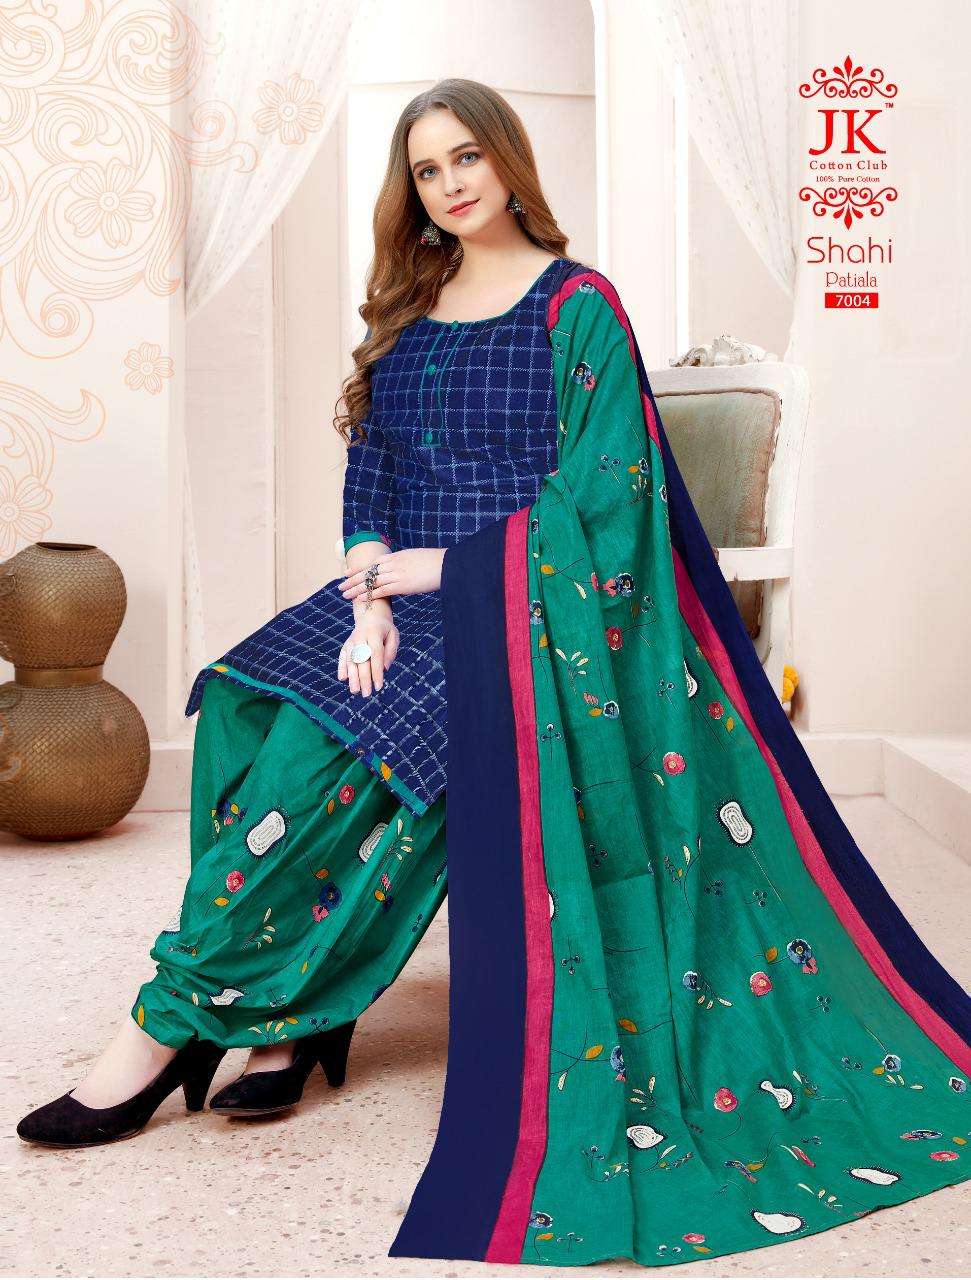 SAHI PATIYALA VOL-7 BY JK COTTON CLUB 7001 TO 7010 SERIES BEAUTIFUL SUITS COLORFUL STYLISH FANCY CASUAL WEAR & ETHNIC WEAR PURE COTTON DRESSES AT WHOLESALE PRICE